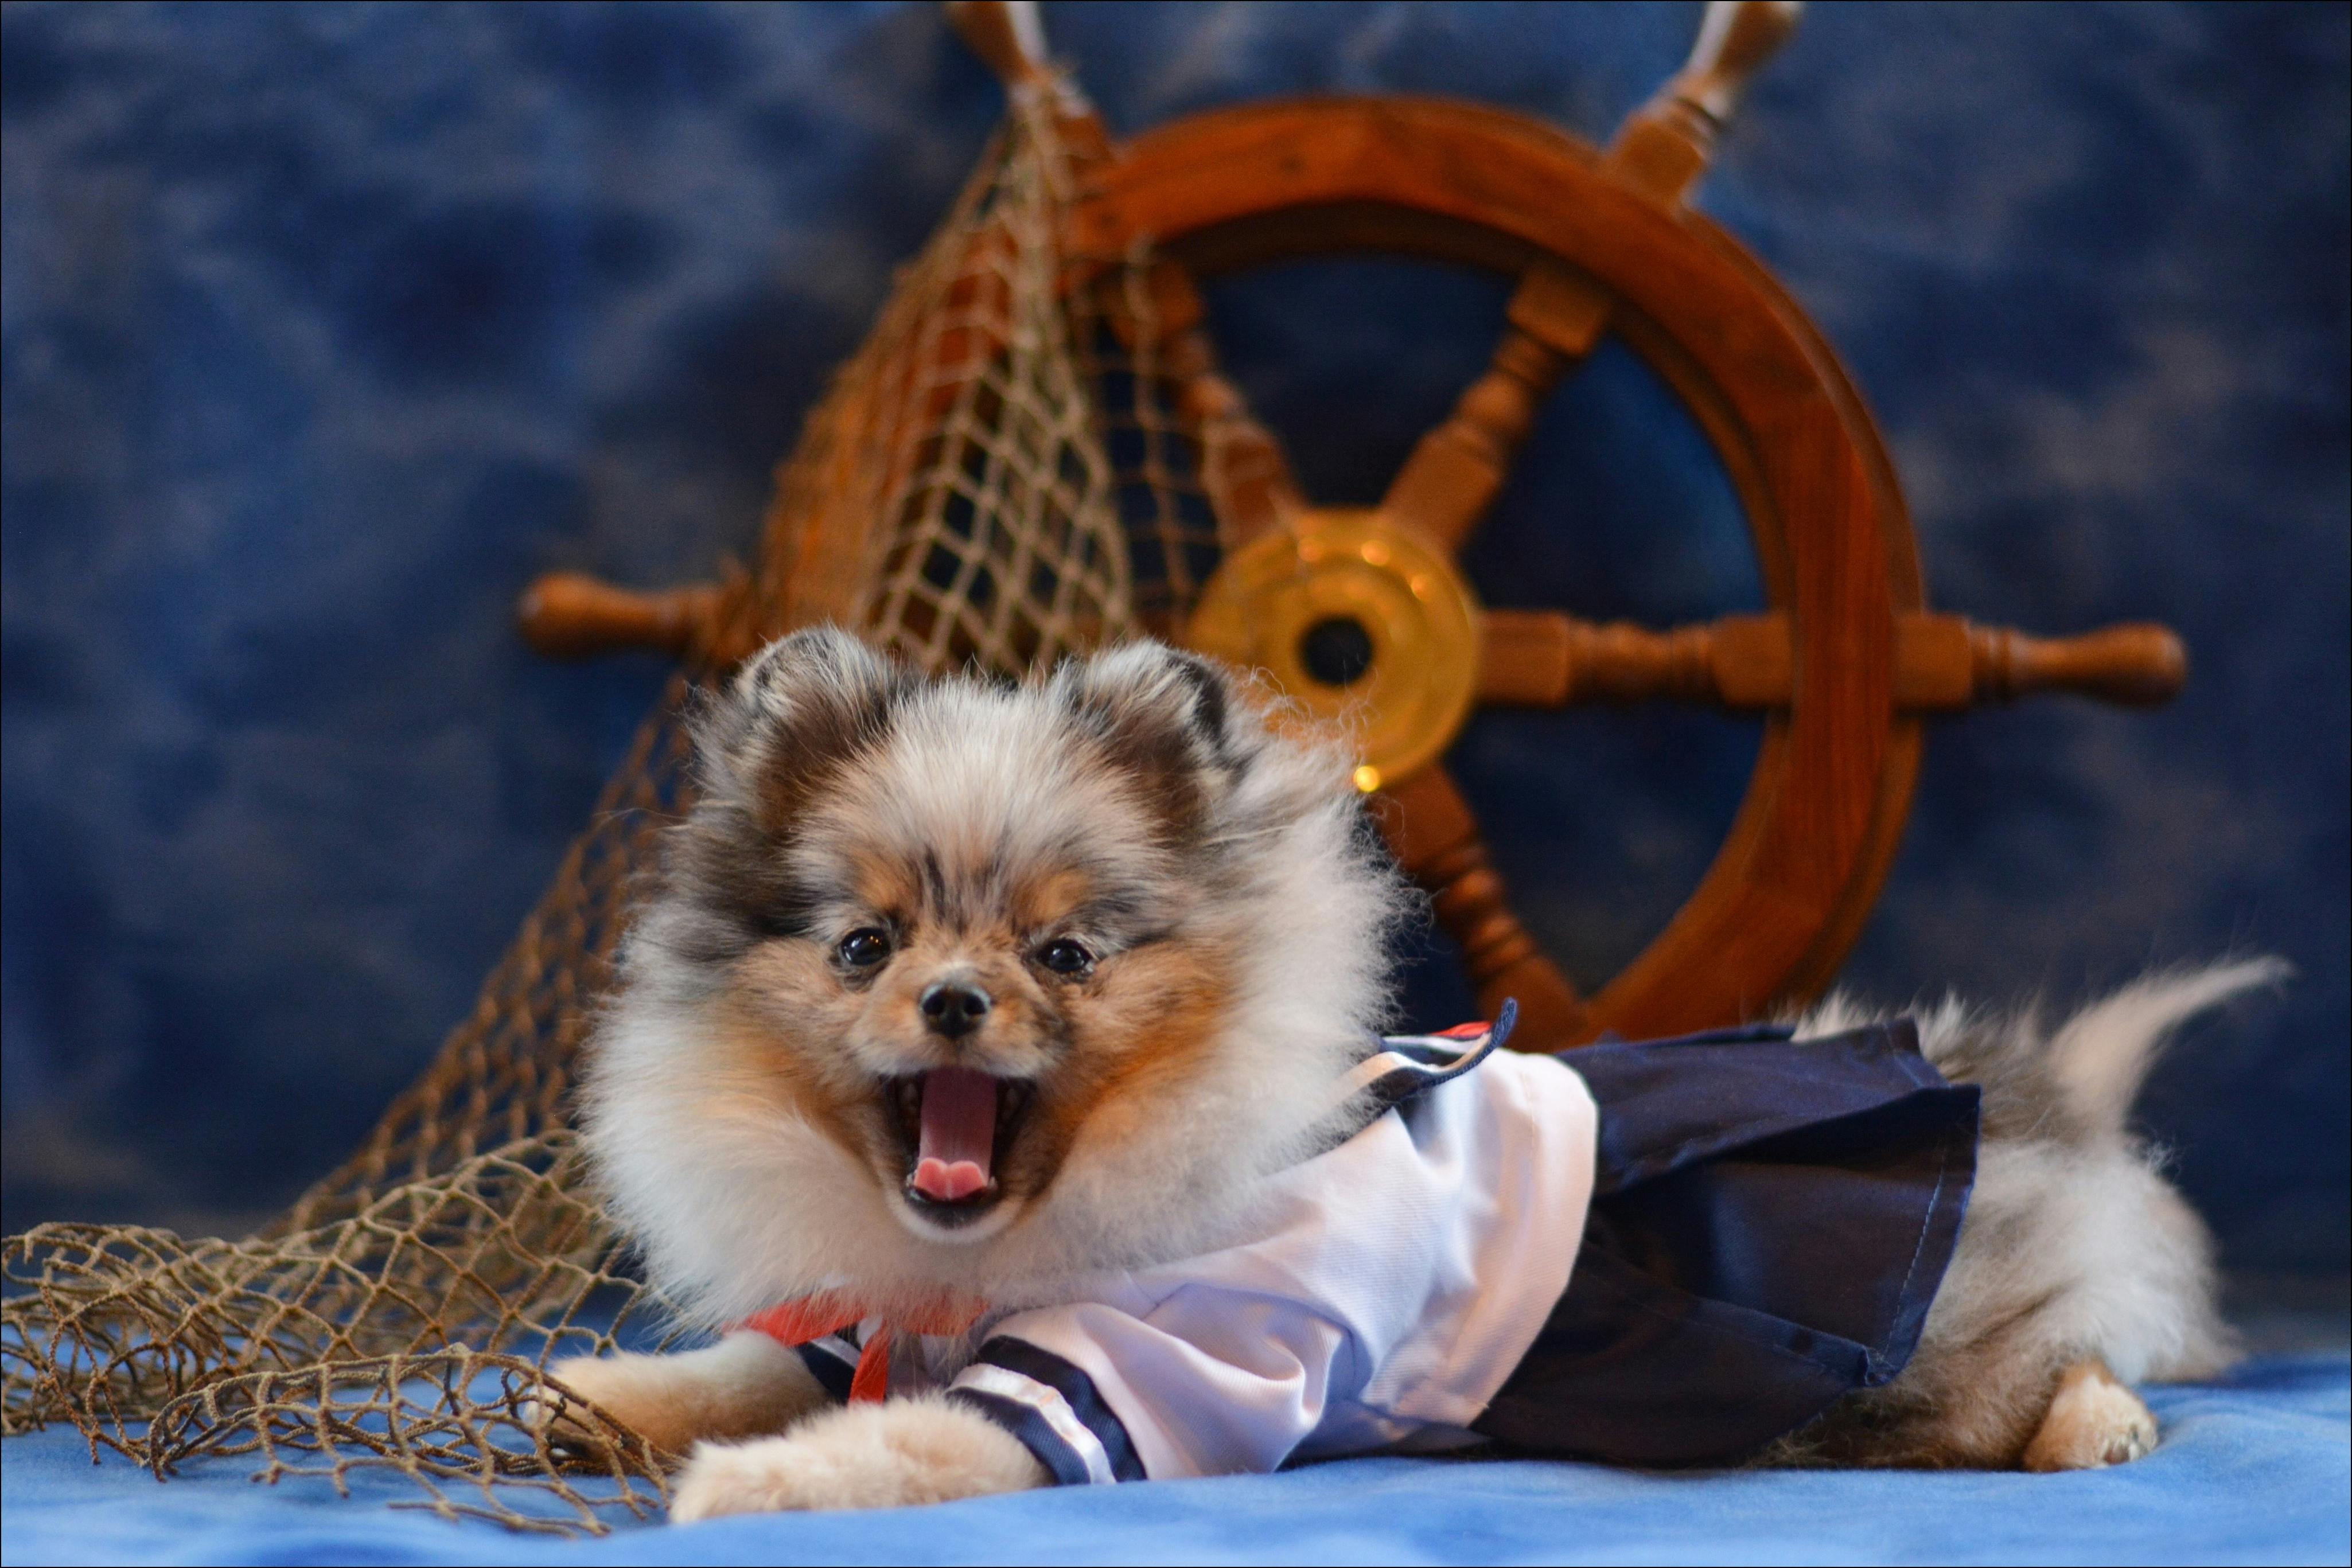 Pierre's costume story for 10 Dog Halloween Costume Ideas for Pomeranians